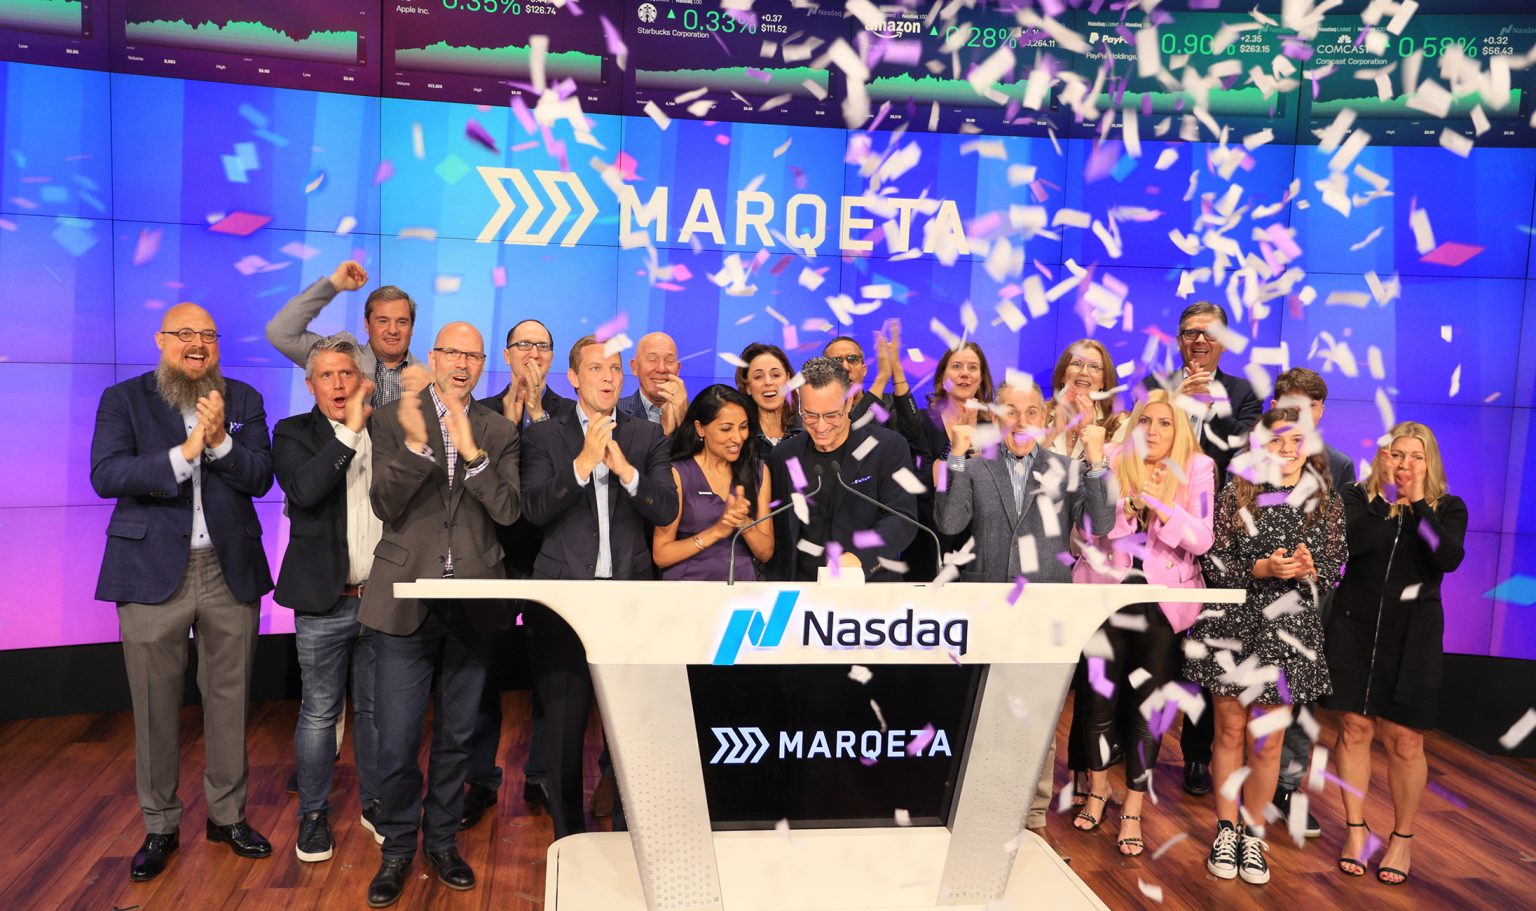 Marqeta begins a new journey as a public company